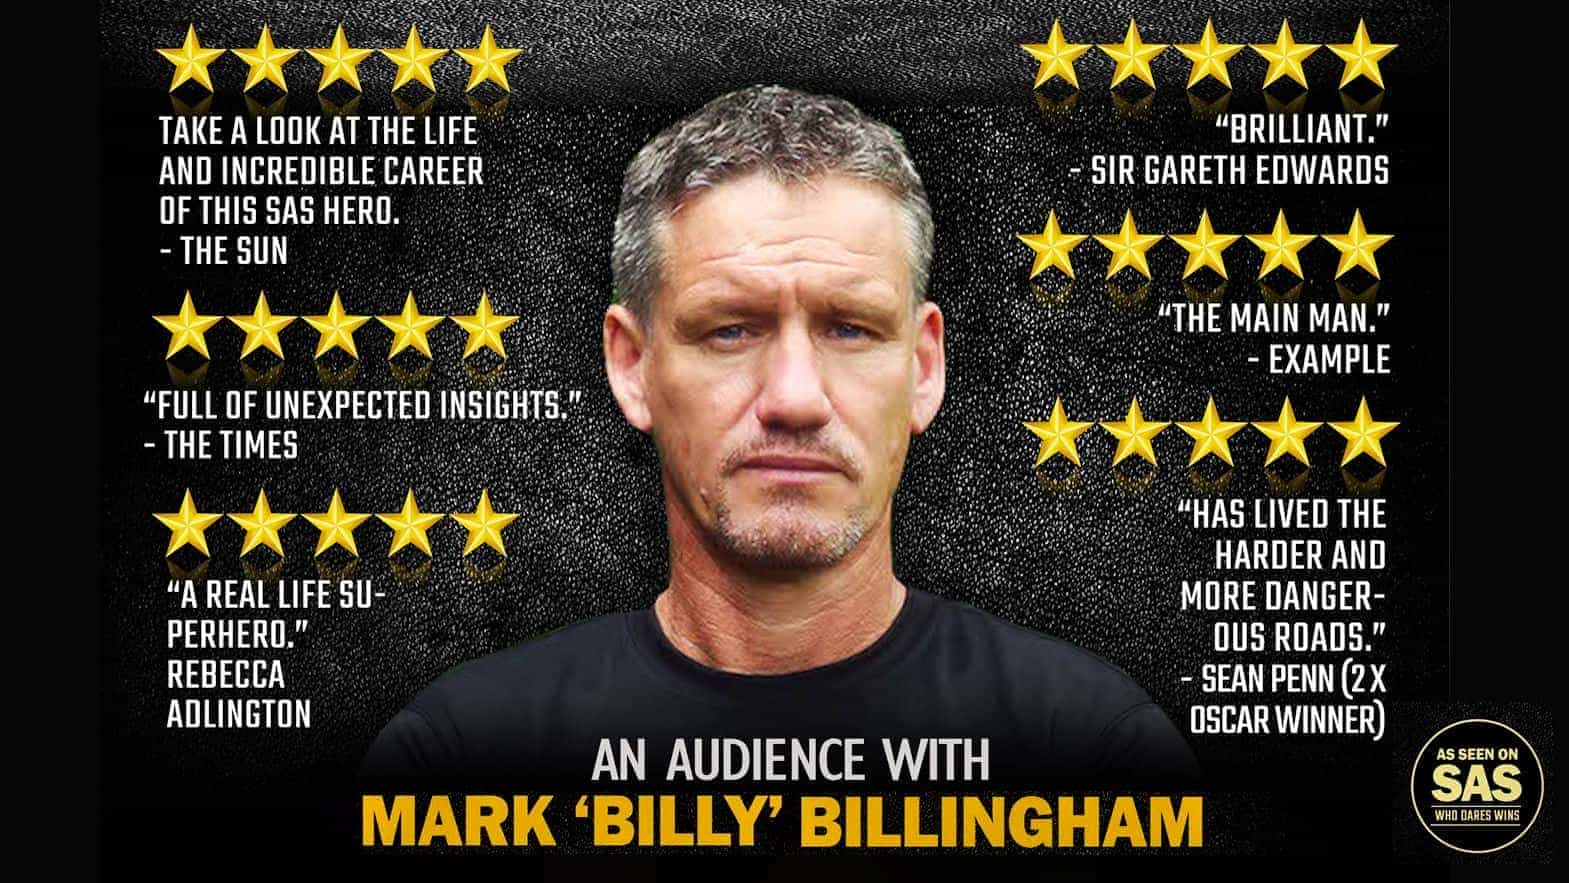 An Audience With Mark 'Billy' Billingham